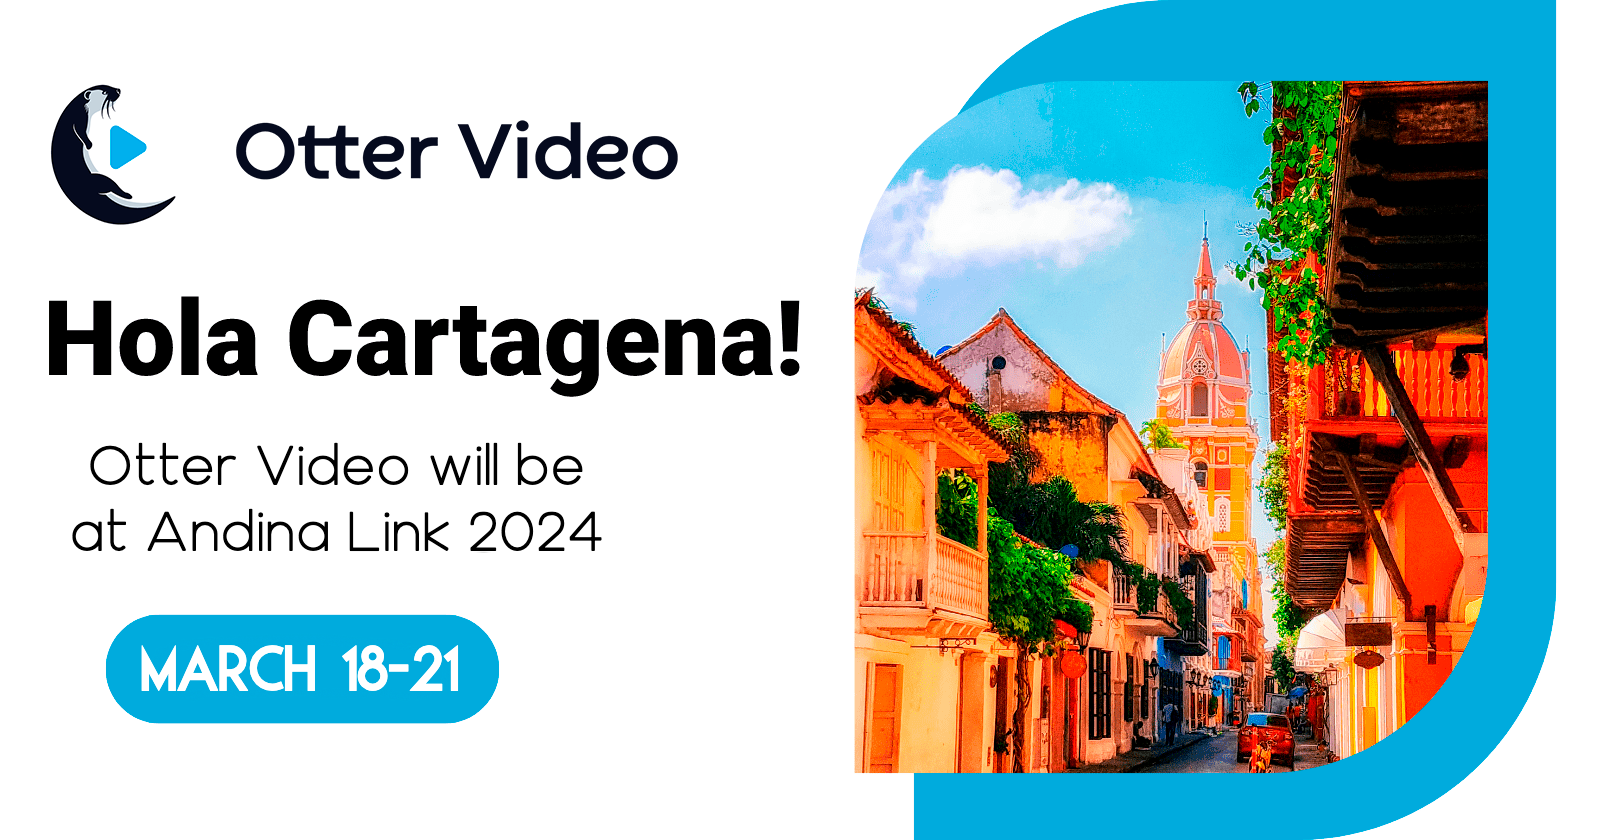 Discover Innovation at Andinalink 2024 Fair with Otter Video Team